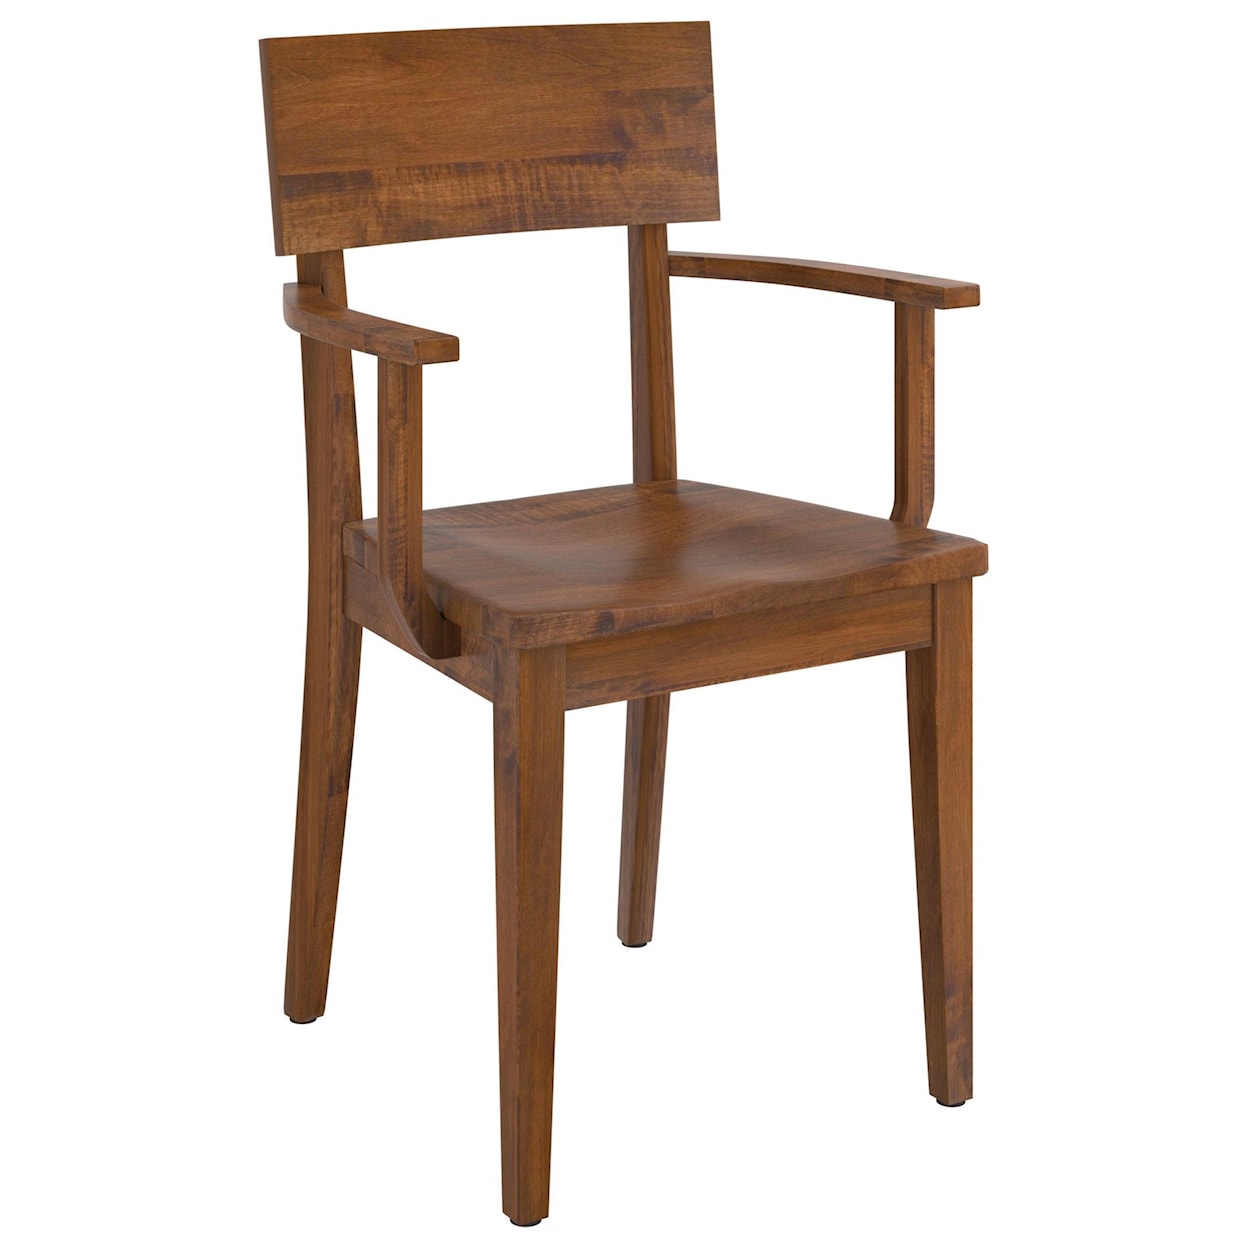 Wengerd Wood Products Fern Arm Chair